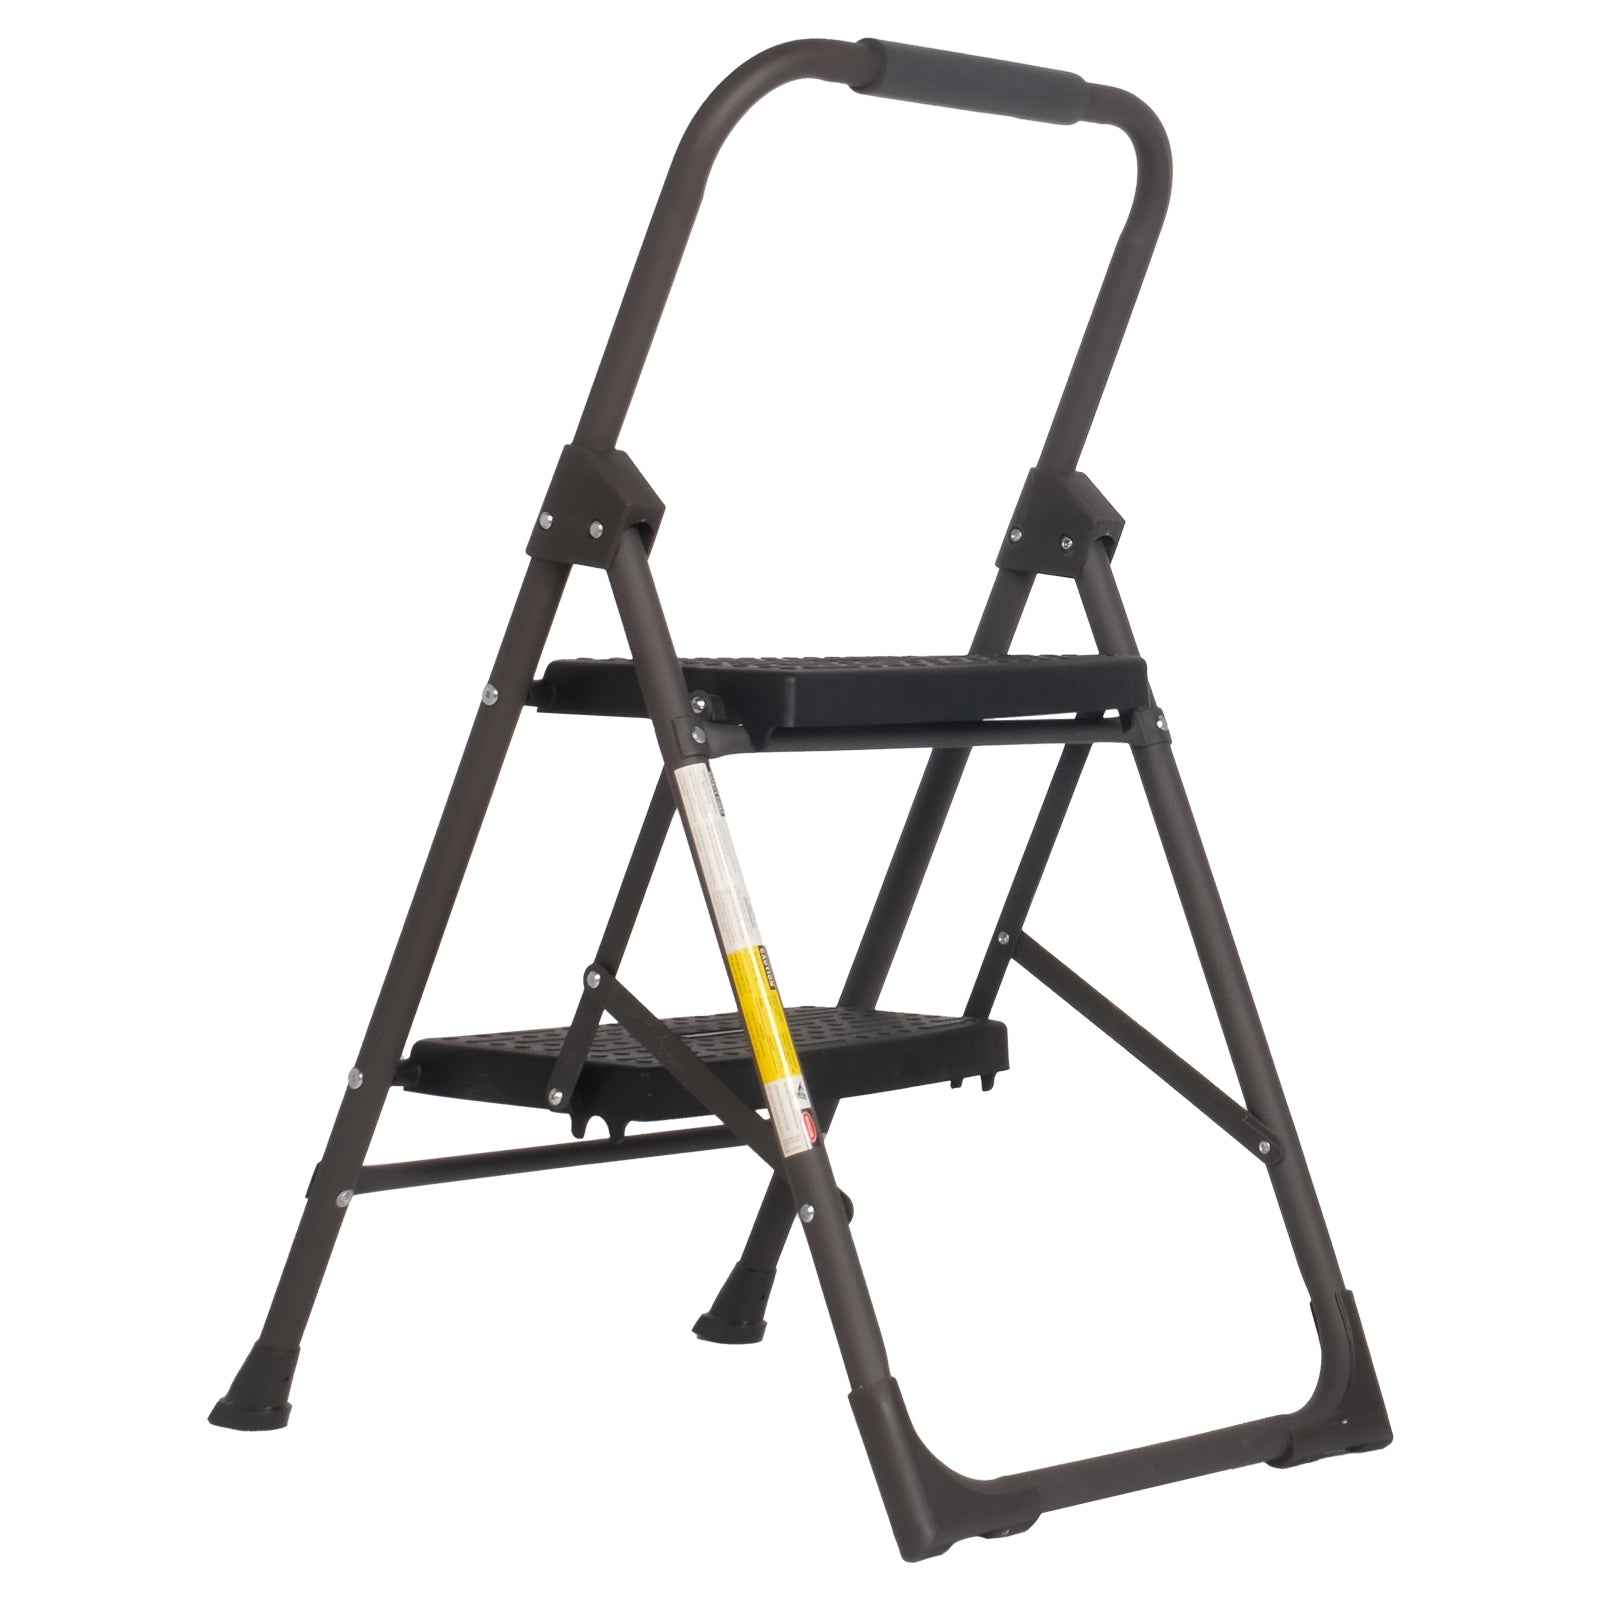 2 Step Portable Folding Ladder Step Stool with Wide Anti-Slip Pedal and Handgrip